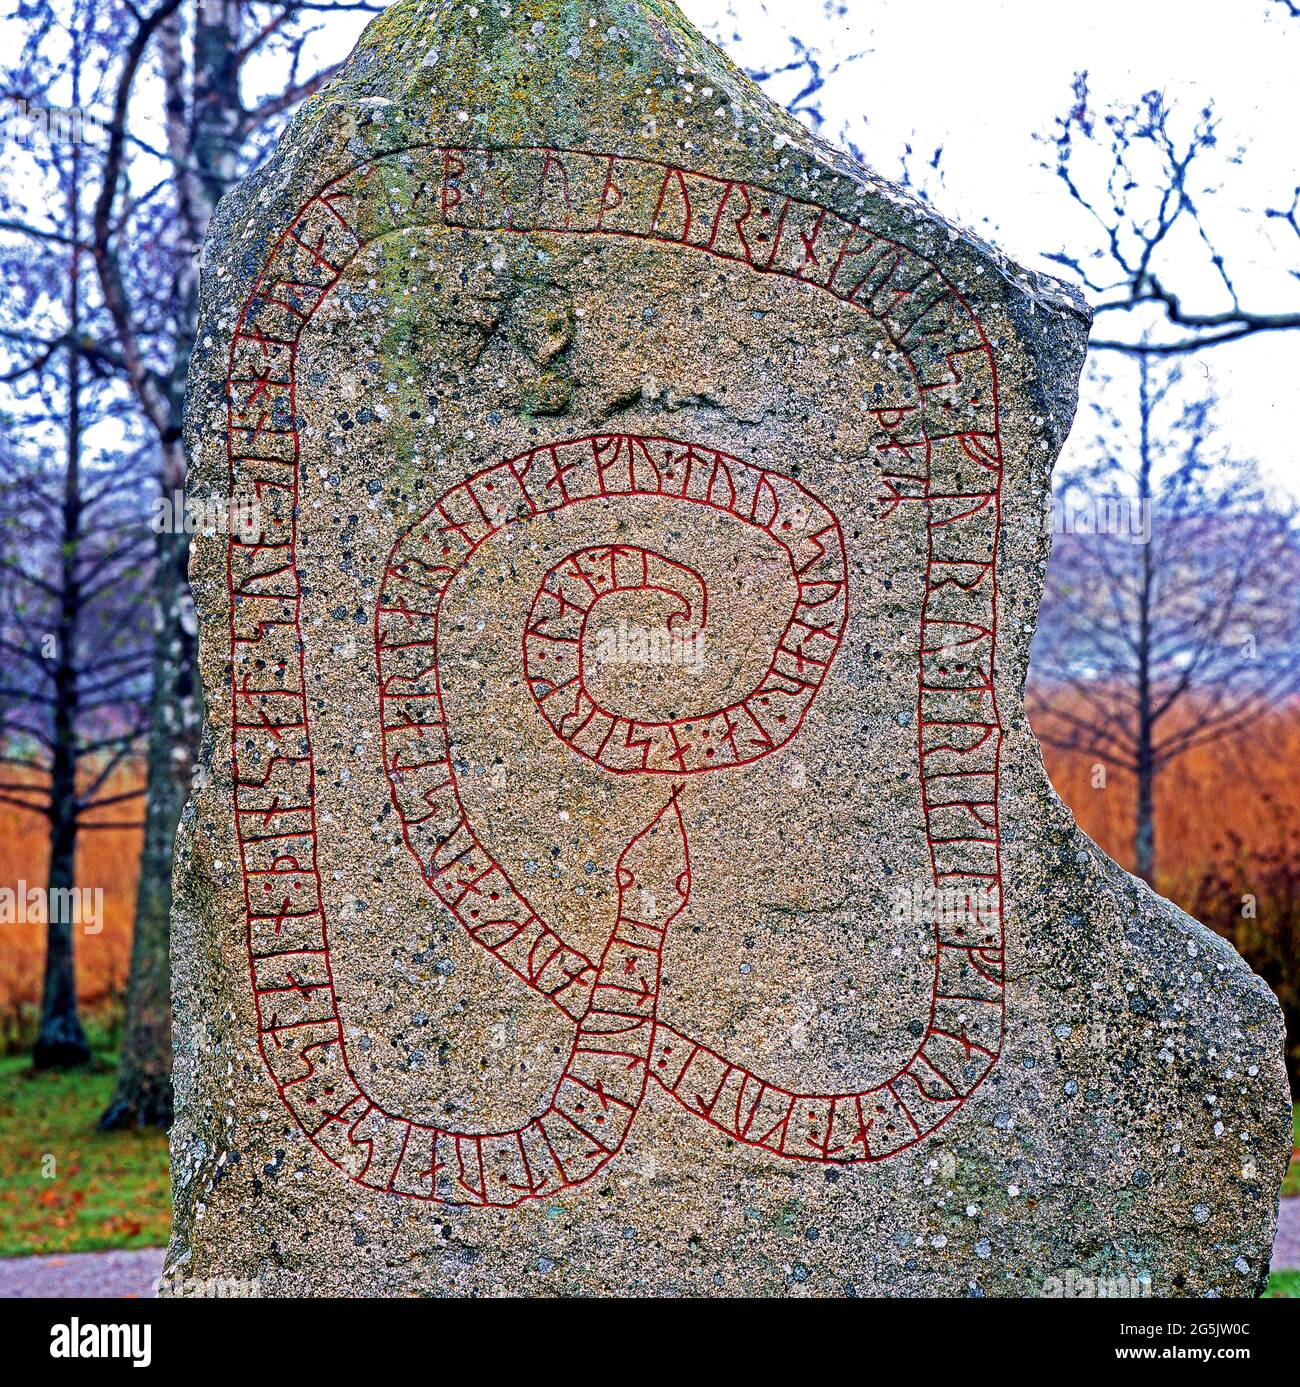 Tola’s Rune Stone for her son Harald c. 1000, Mariefred, Stock Photo